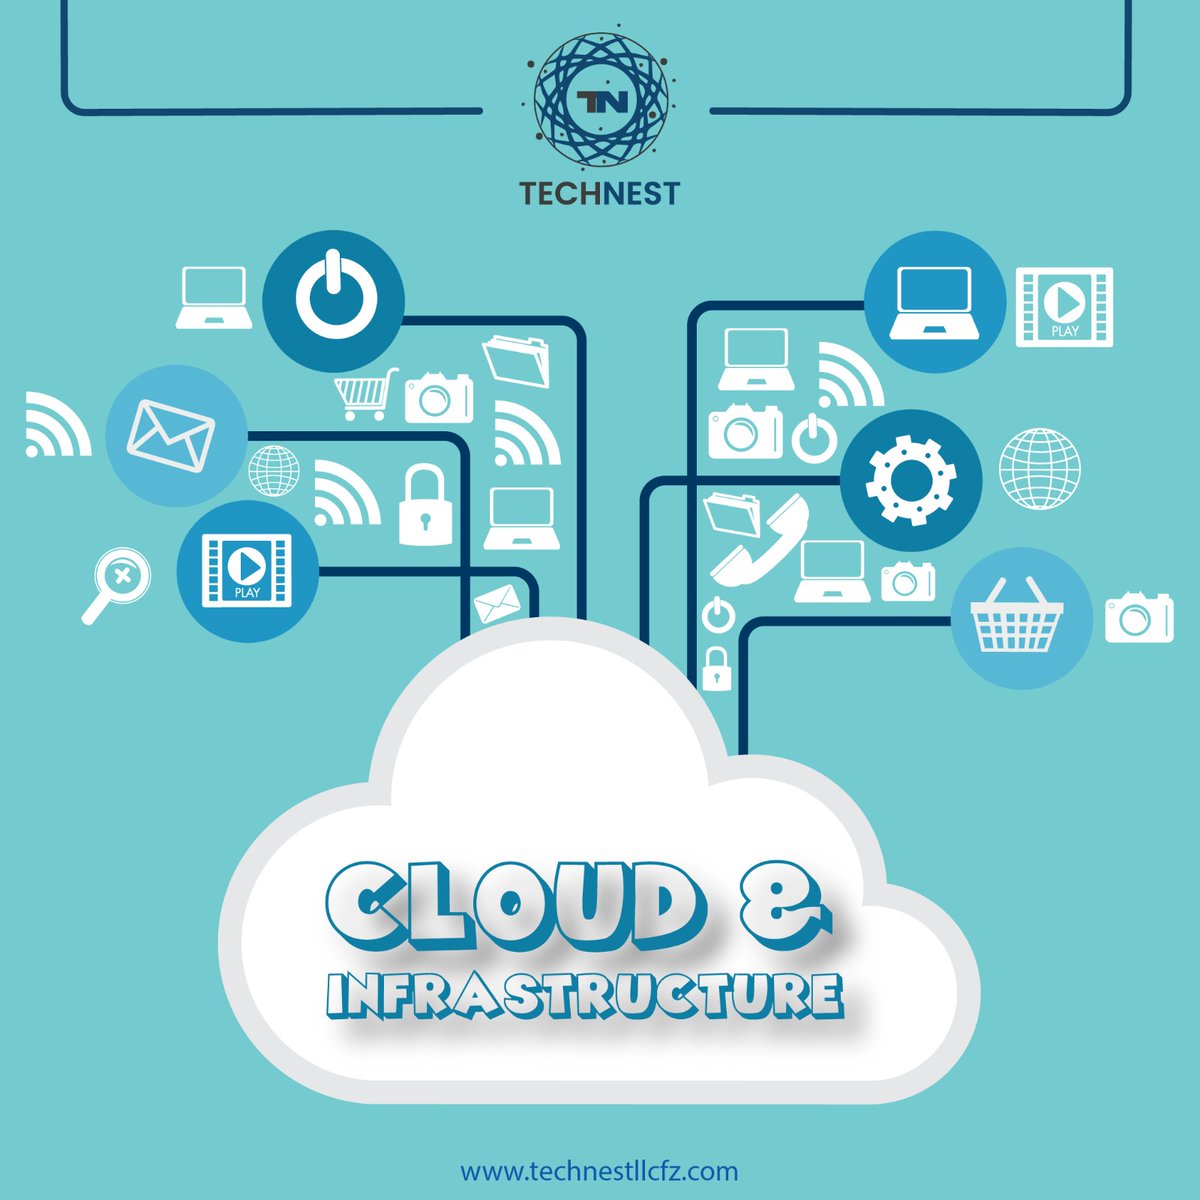 Take your business to new heights with the transformative power of the cloud. Experience unmatched flexibility, efficiency, and security with our comprehensive infrastructure solutions. ☁️💪🌐
.
.
#cloudandinfrastructure #technestllcfz #cloud